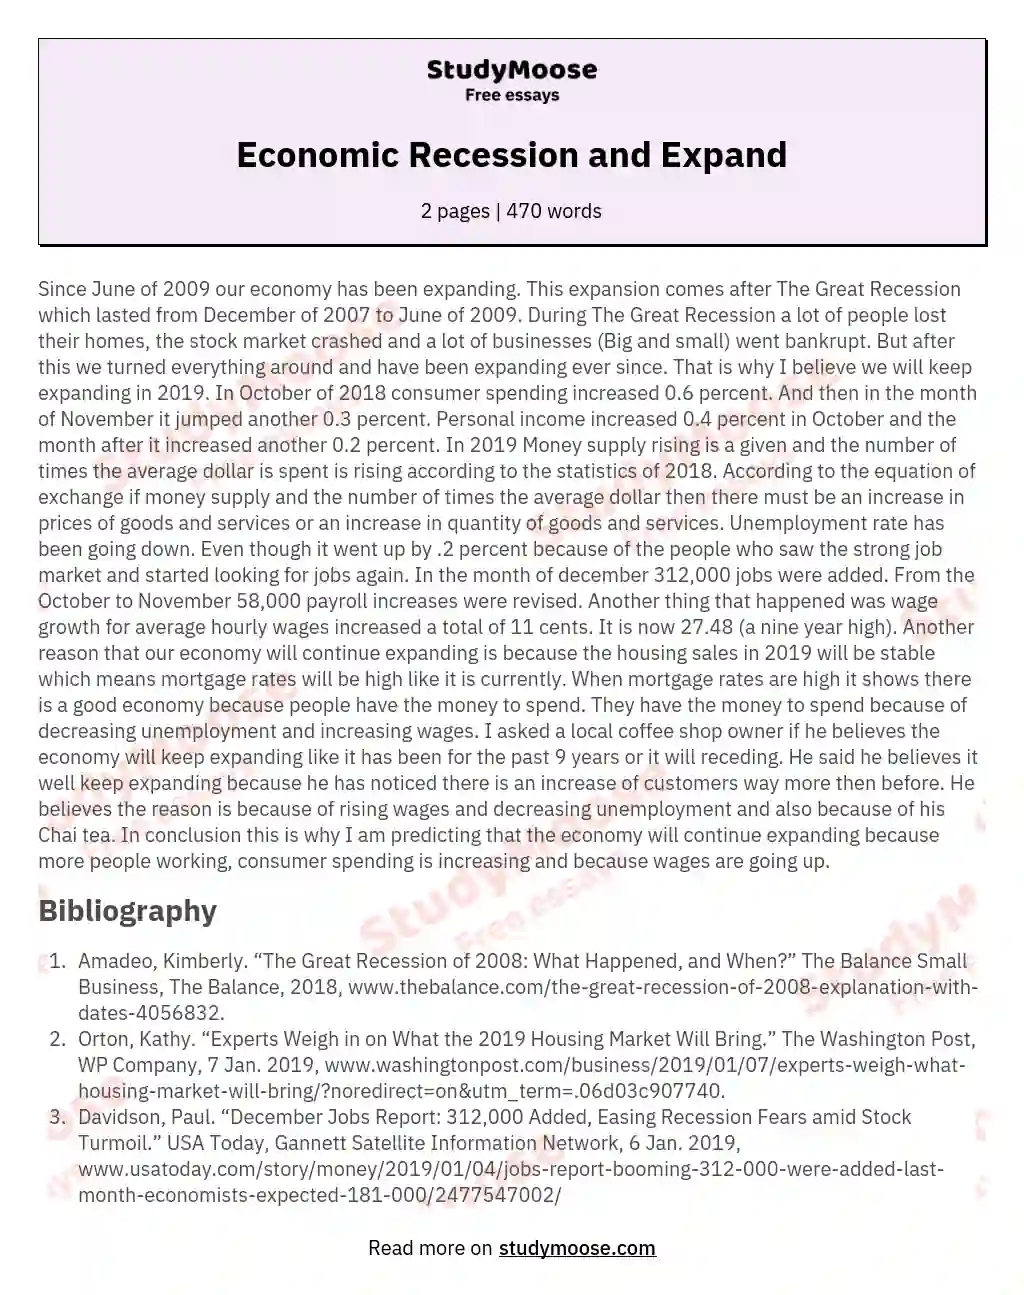 Economic Recession and Expand